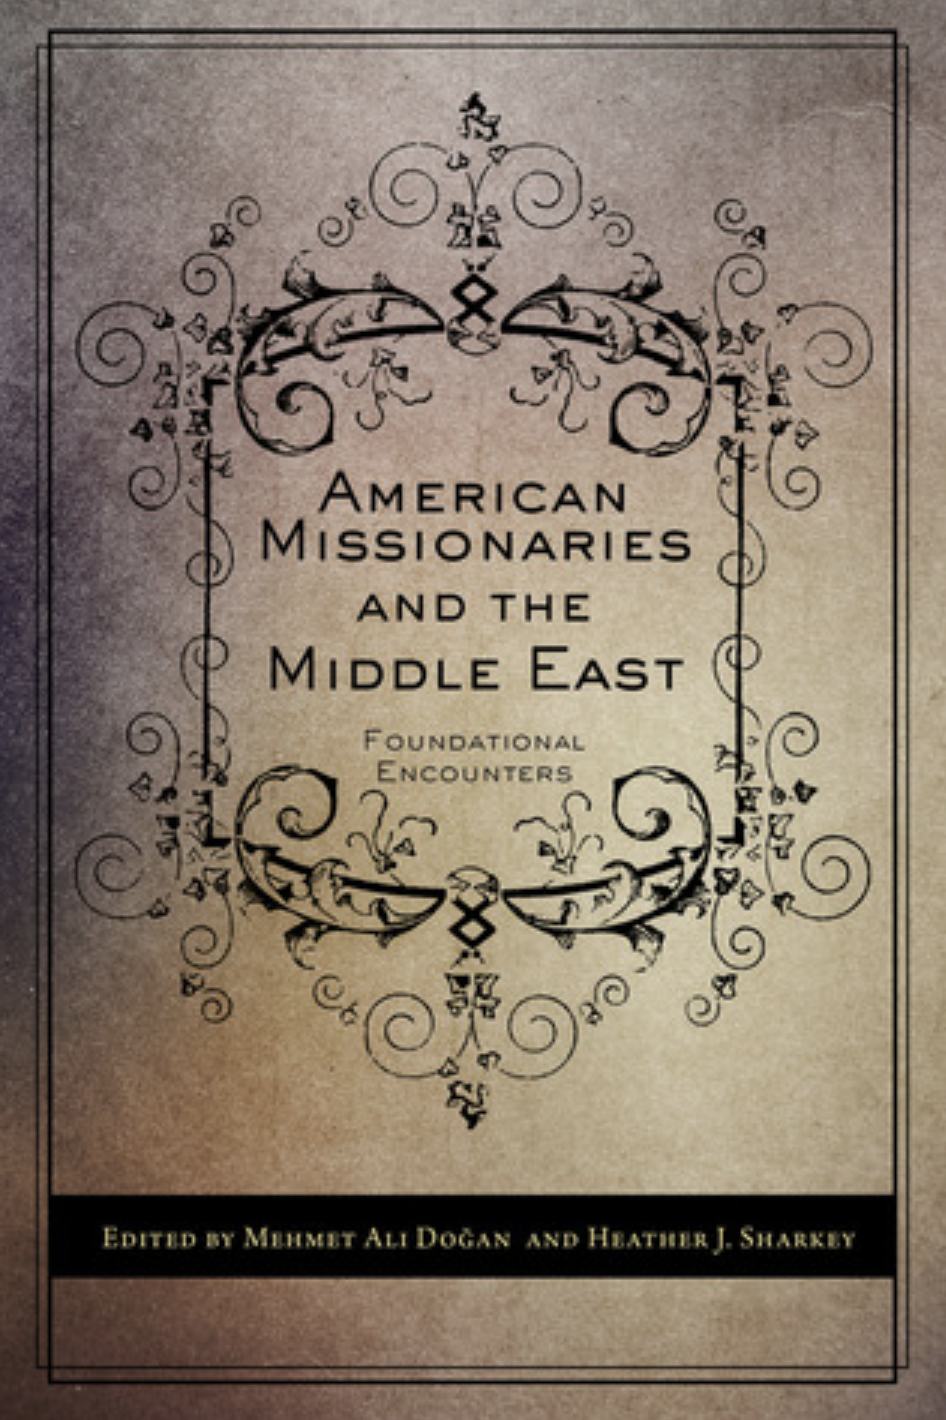 Photo Of Book Cover For The Book Entitled American Missionaries And the Middle East 